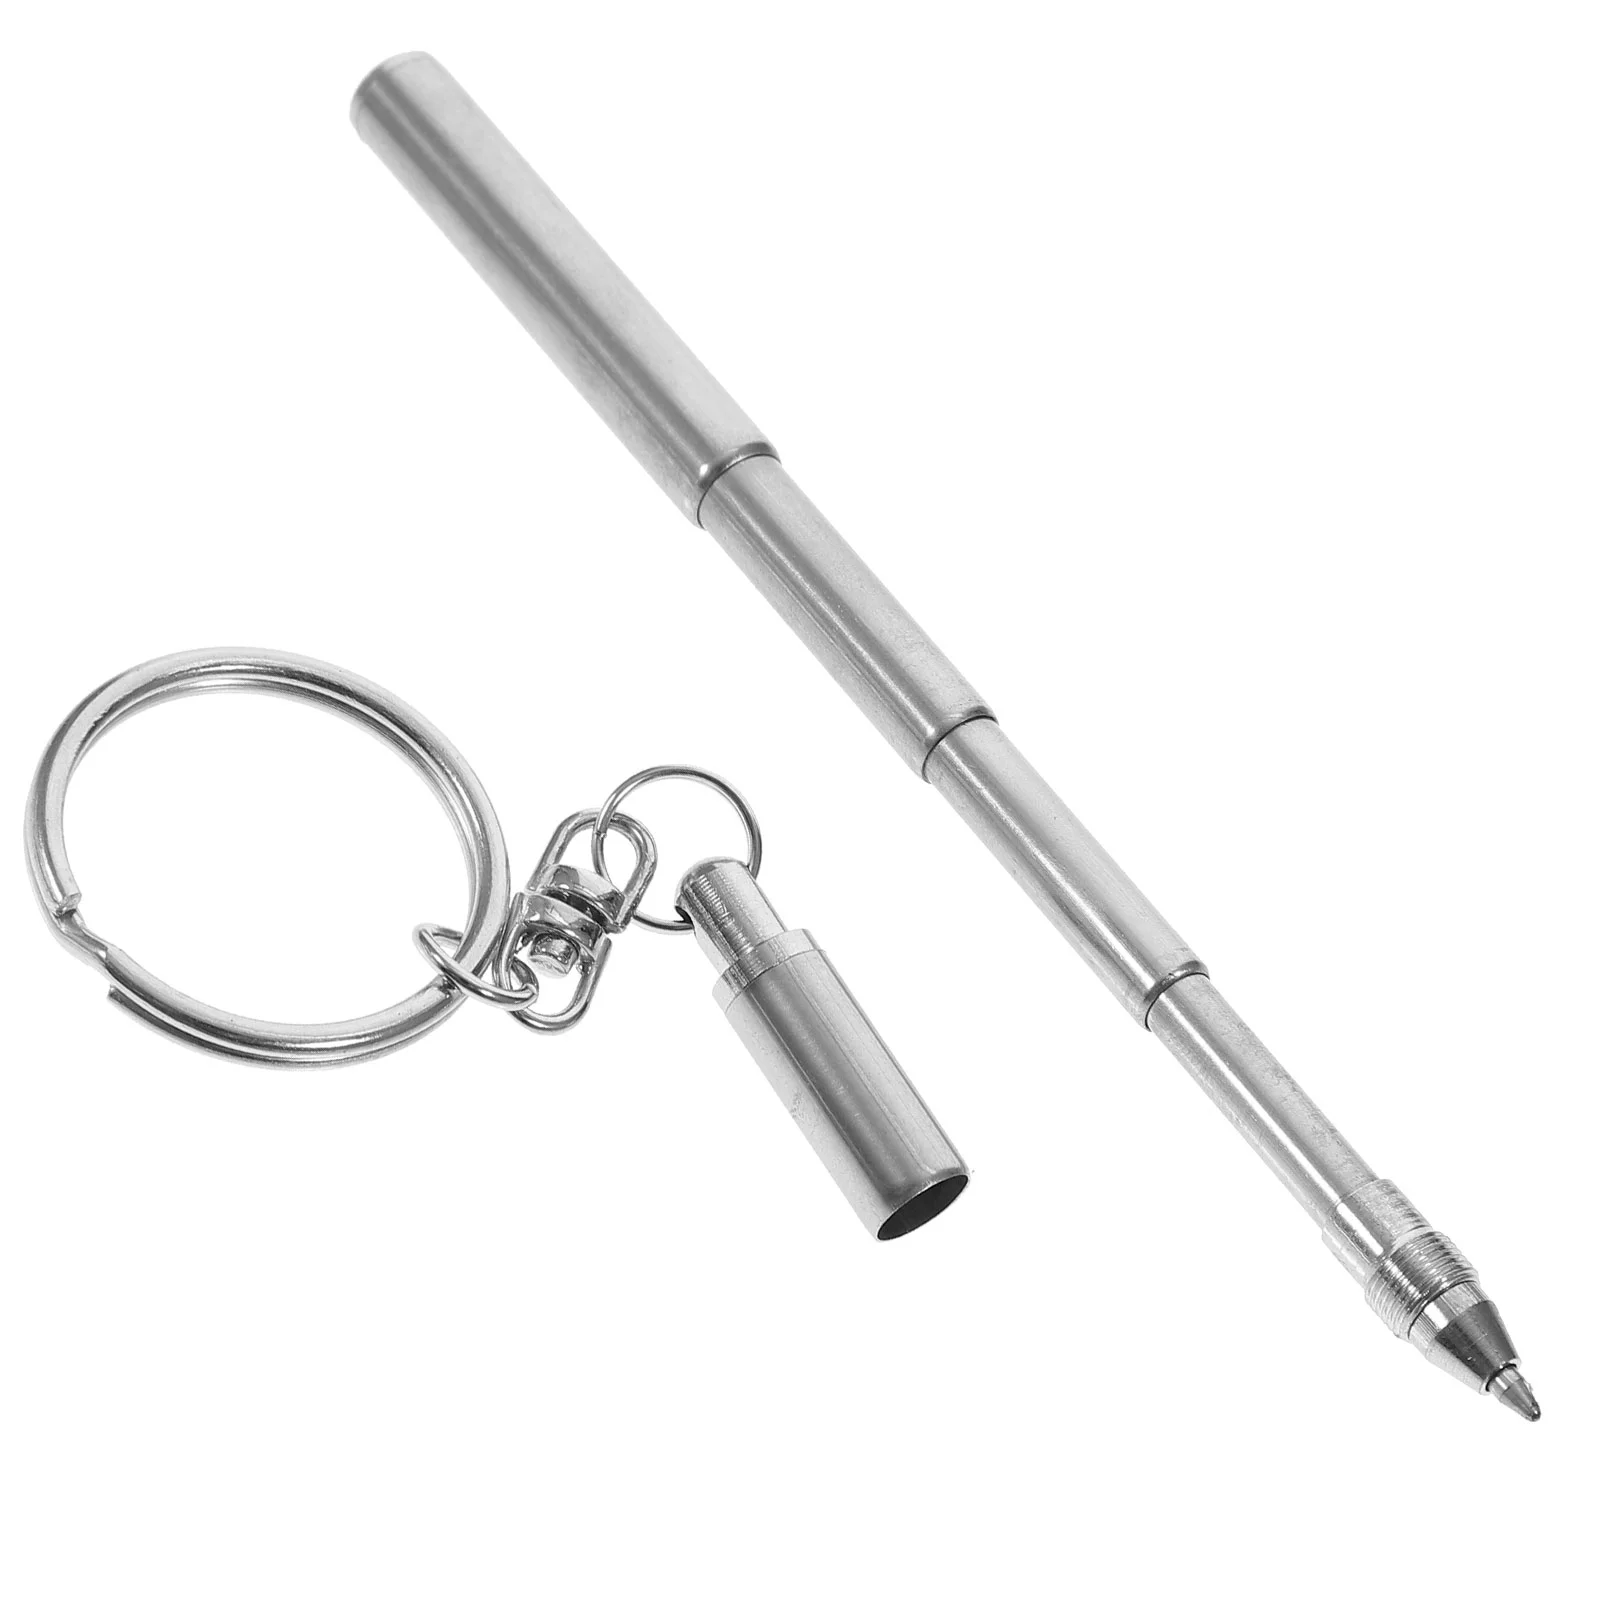 Retractable Pen Shape Keychain Mini Metal Key Ring Portable Stainless Steel Telescopic Ball Point Pens Black Keychain Tools new arrival women s mini stud earring ring jewelry box useful makeup organizer with zipper travel portable bracelet storage case